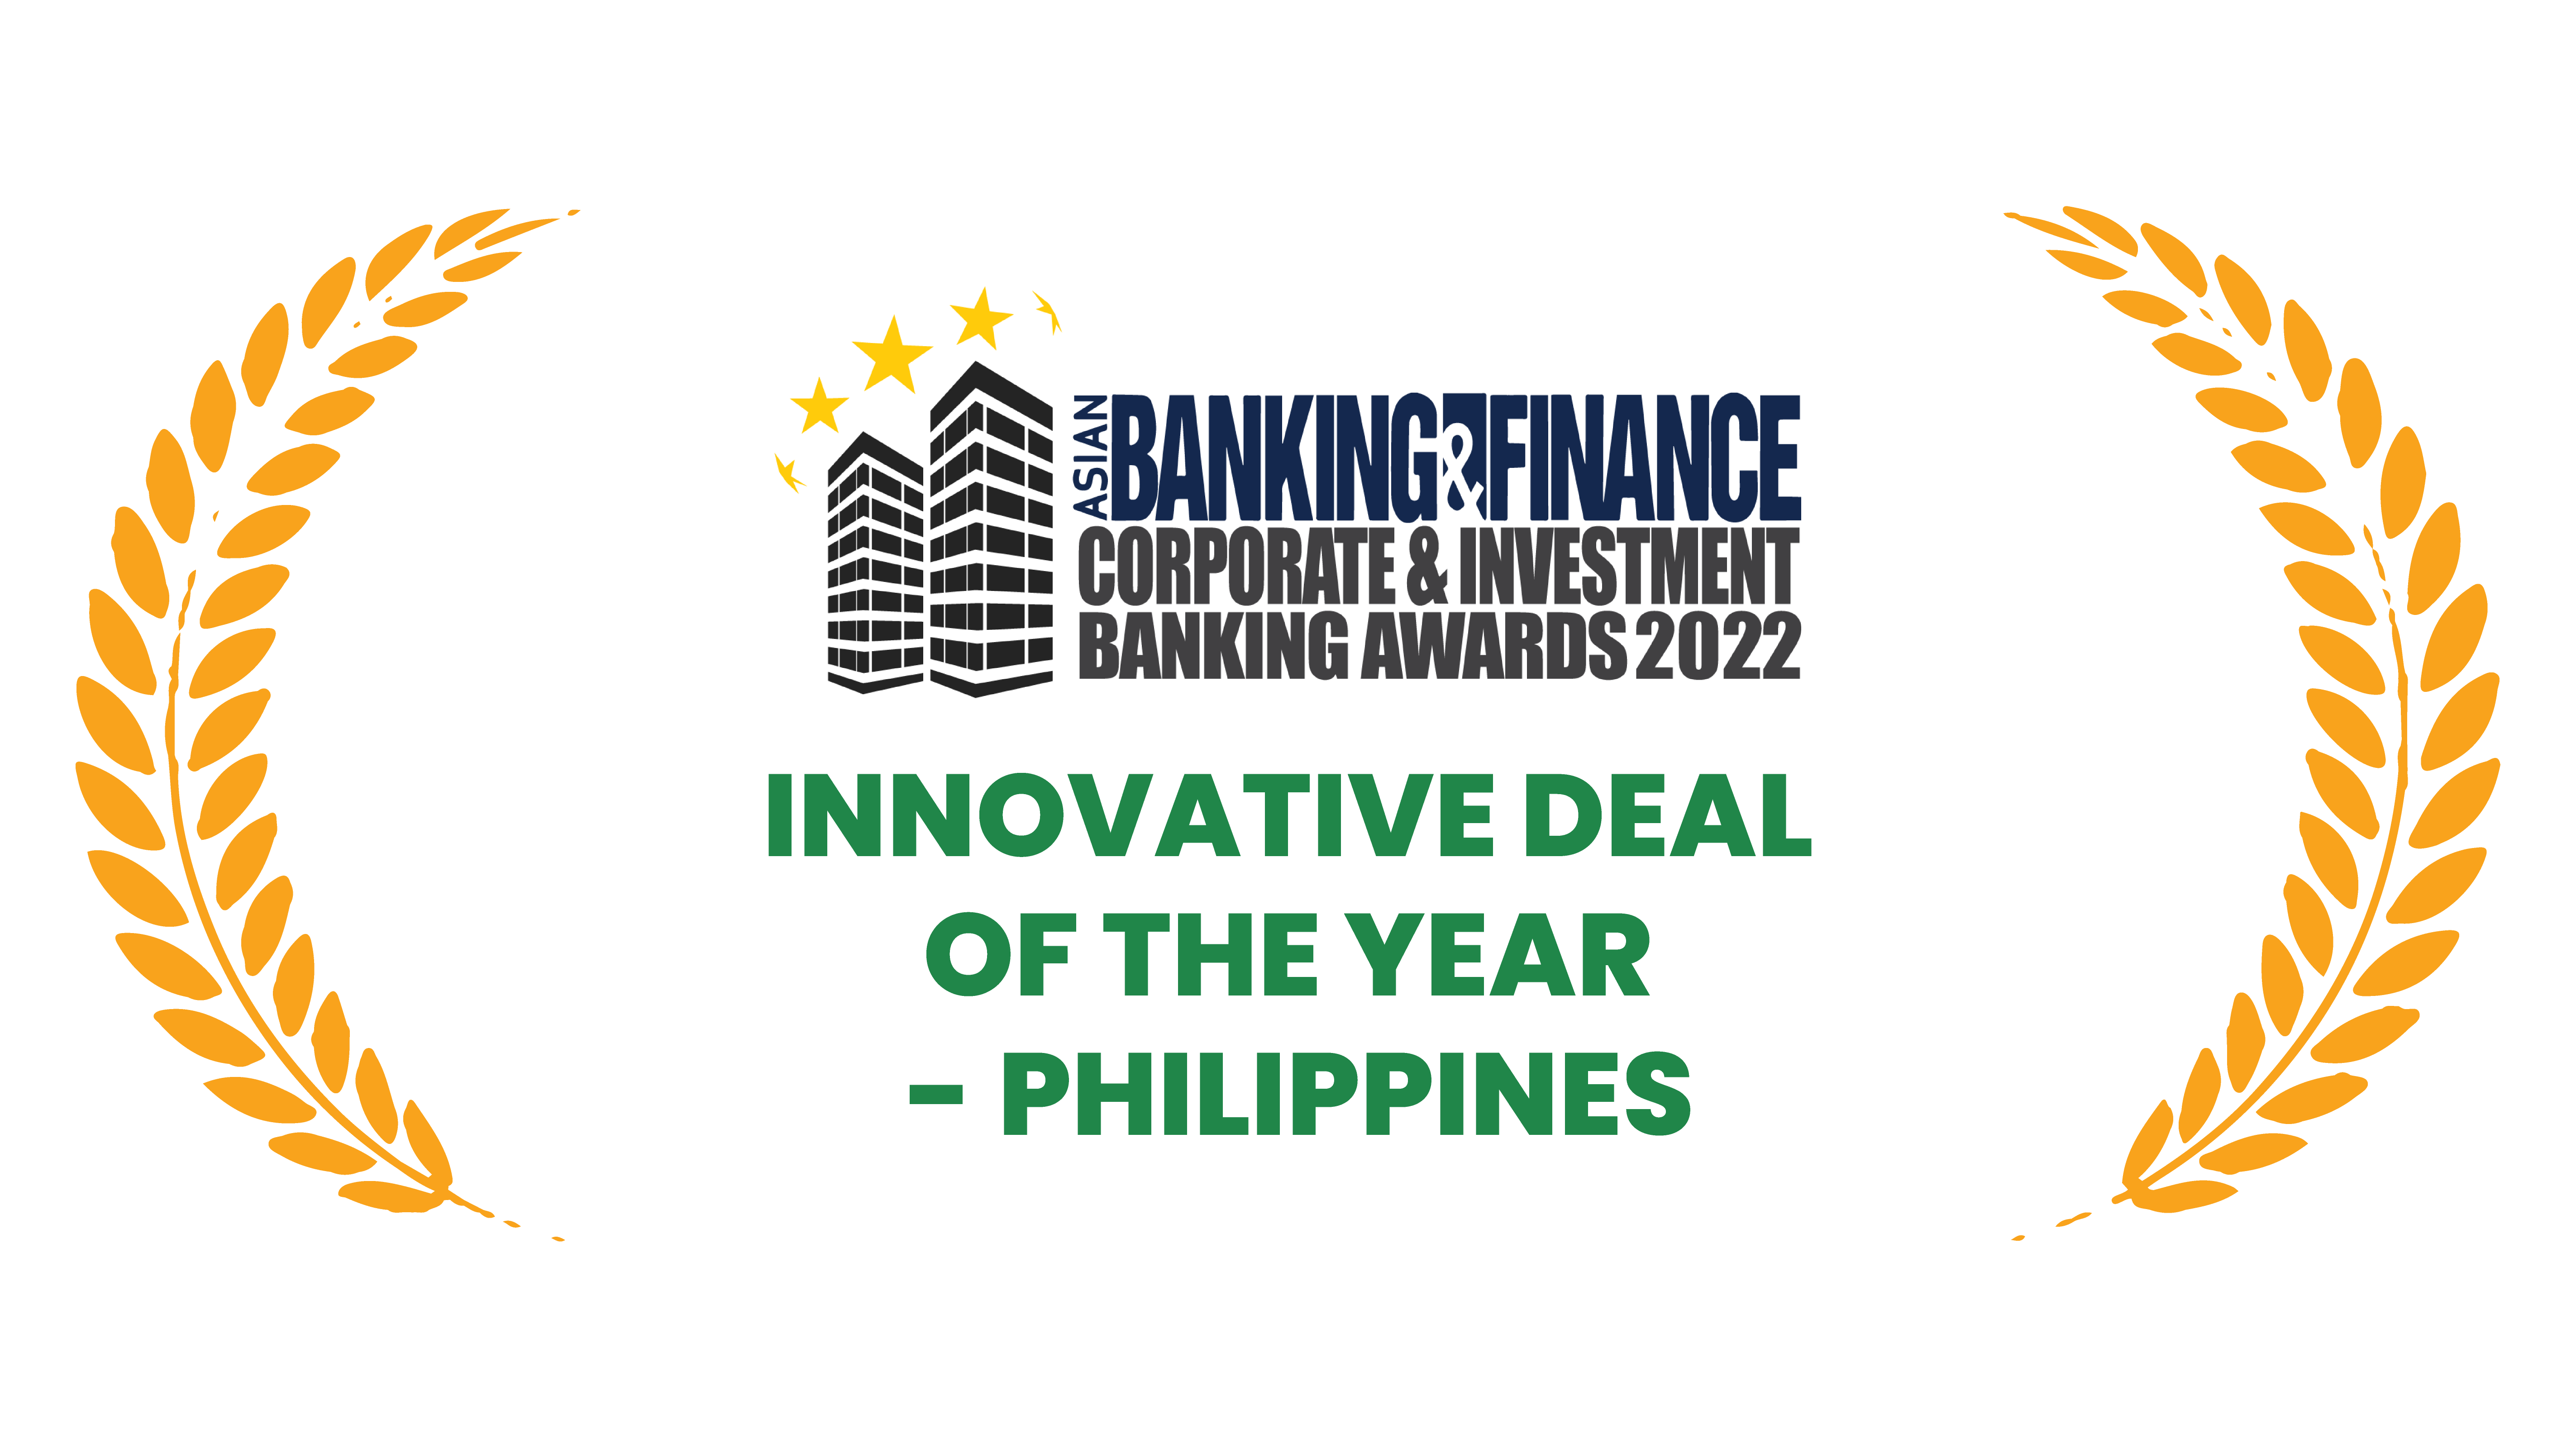 Asian Banking & Finance Corporate & Investment Banking Awards 2022 - Innovative Deal of the Year - Philippines